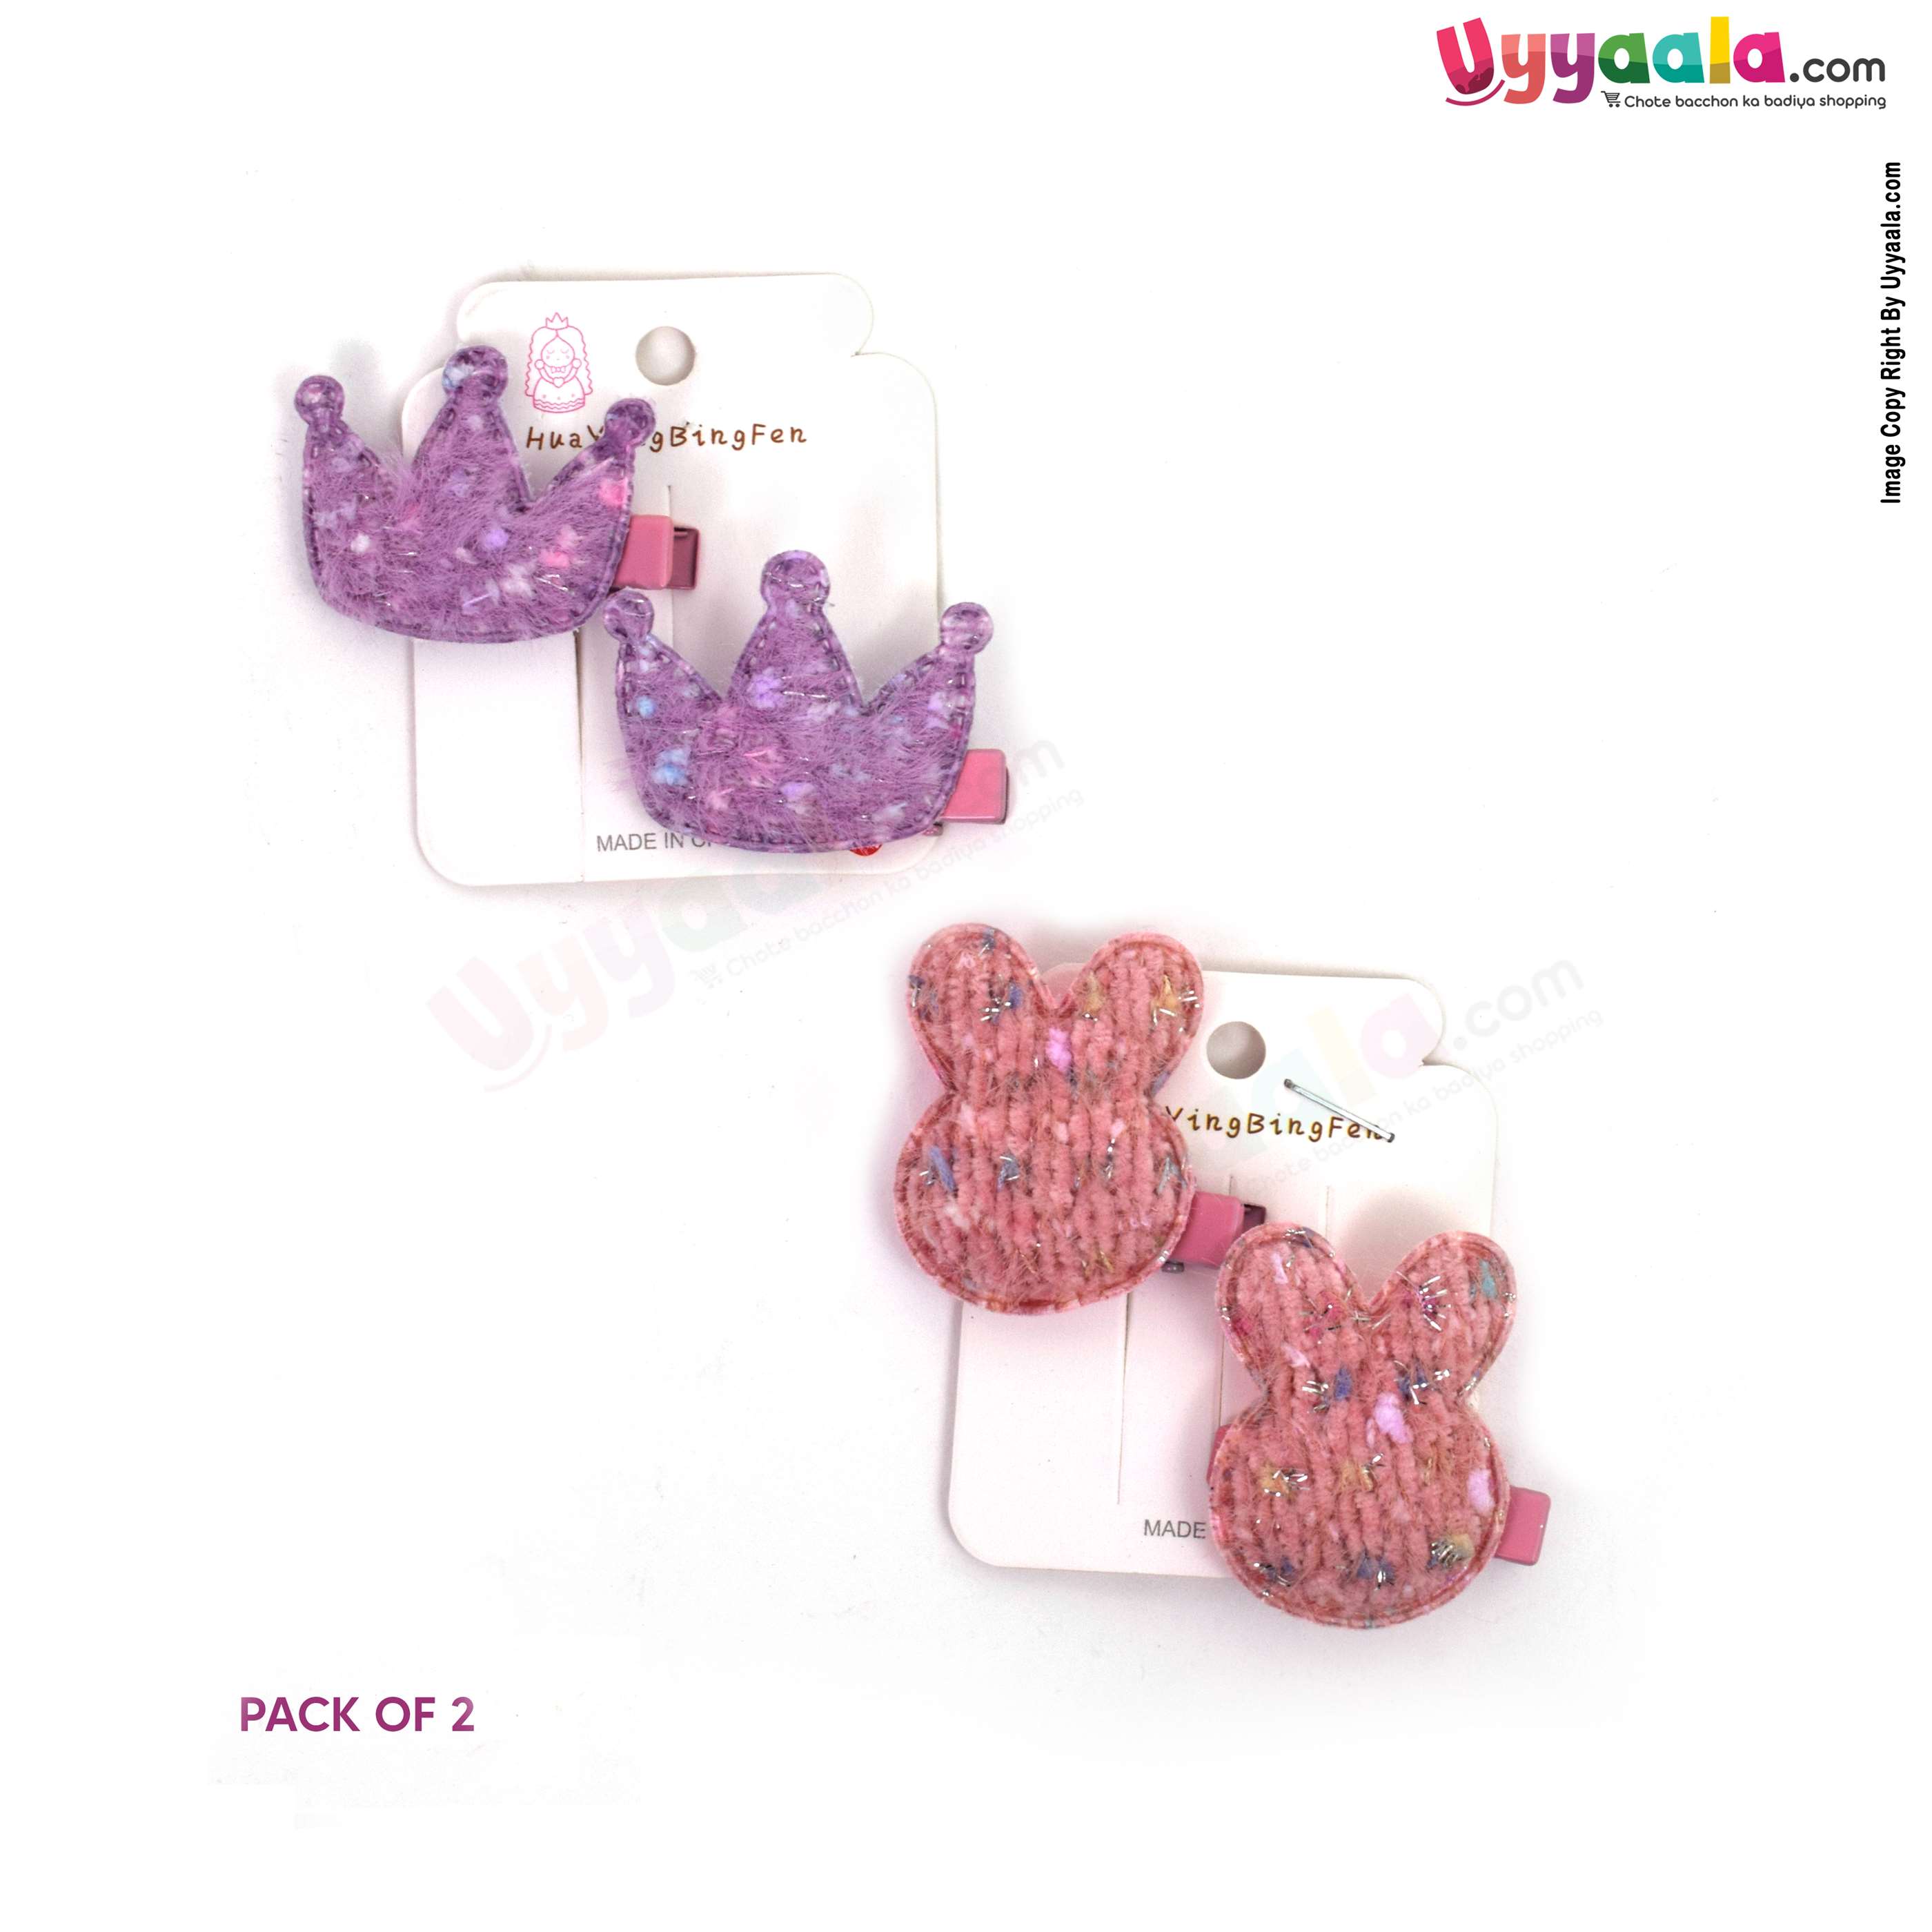 Crown & bunny hair clip set for babies & girls, Pack of 2 - violet & pink, 6 + months